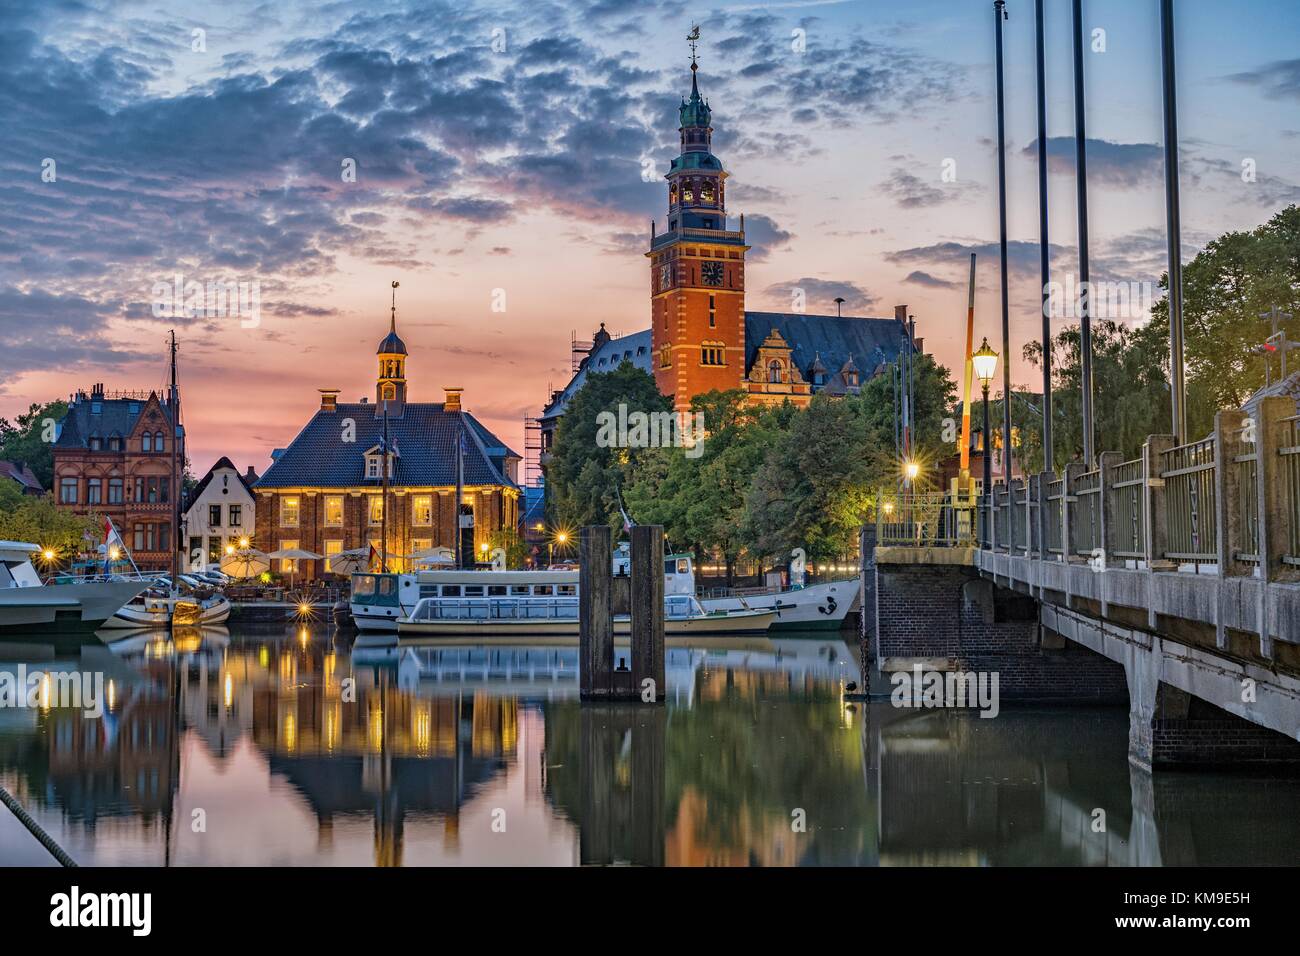 Townscape at sunset, Leer, Lower Saxony, Germany Stock Photo